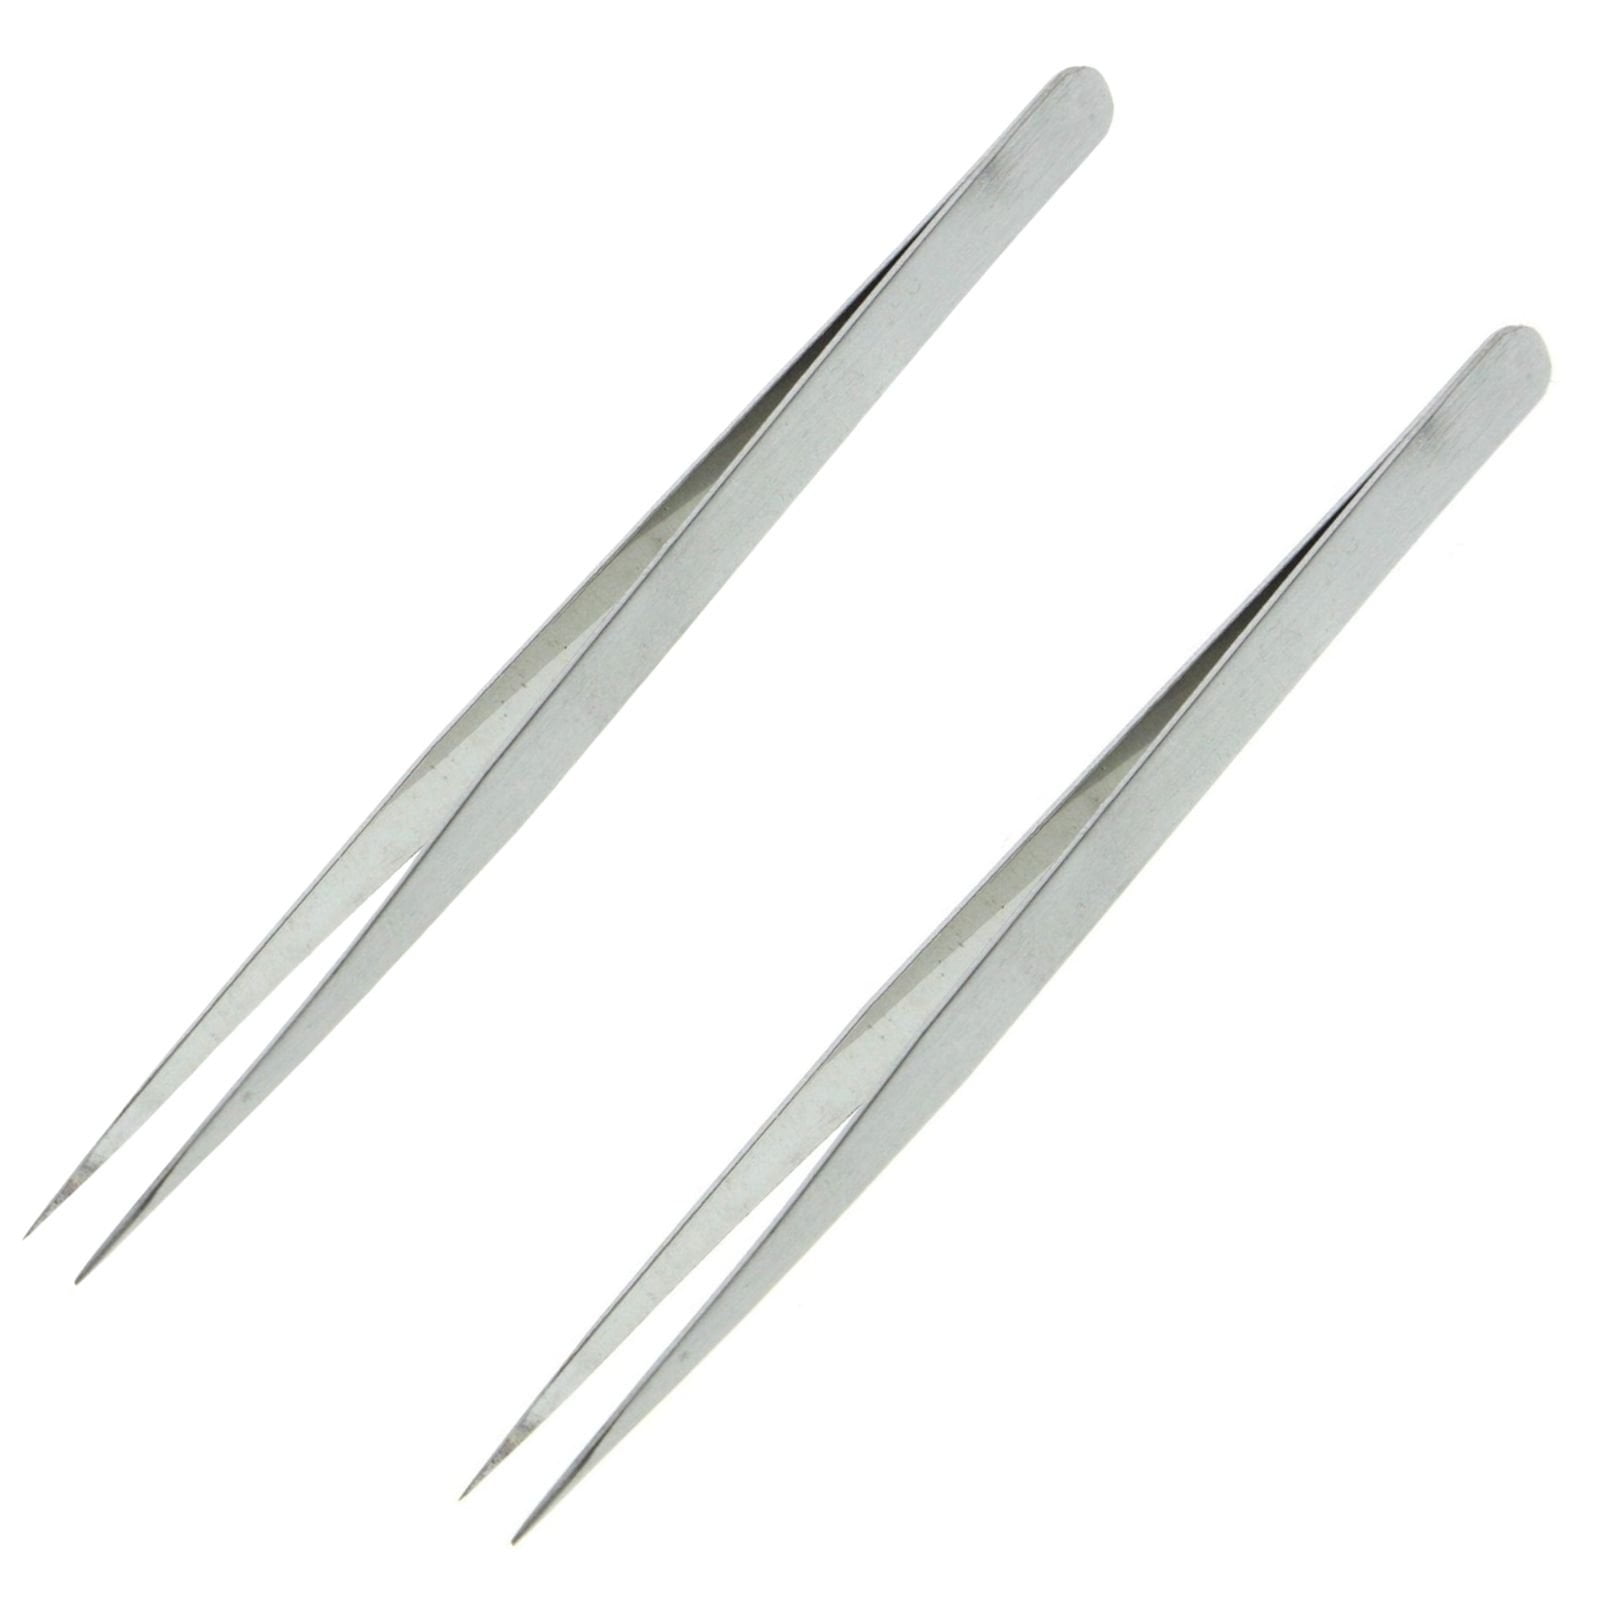 Universal 2 Pack Fine Point Precision Tweezers for Eyebrow and Hair Removal, Size: Standard, Silver